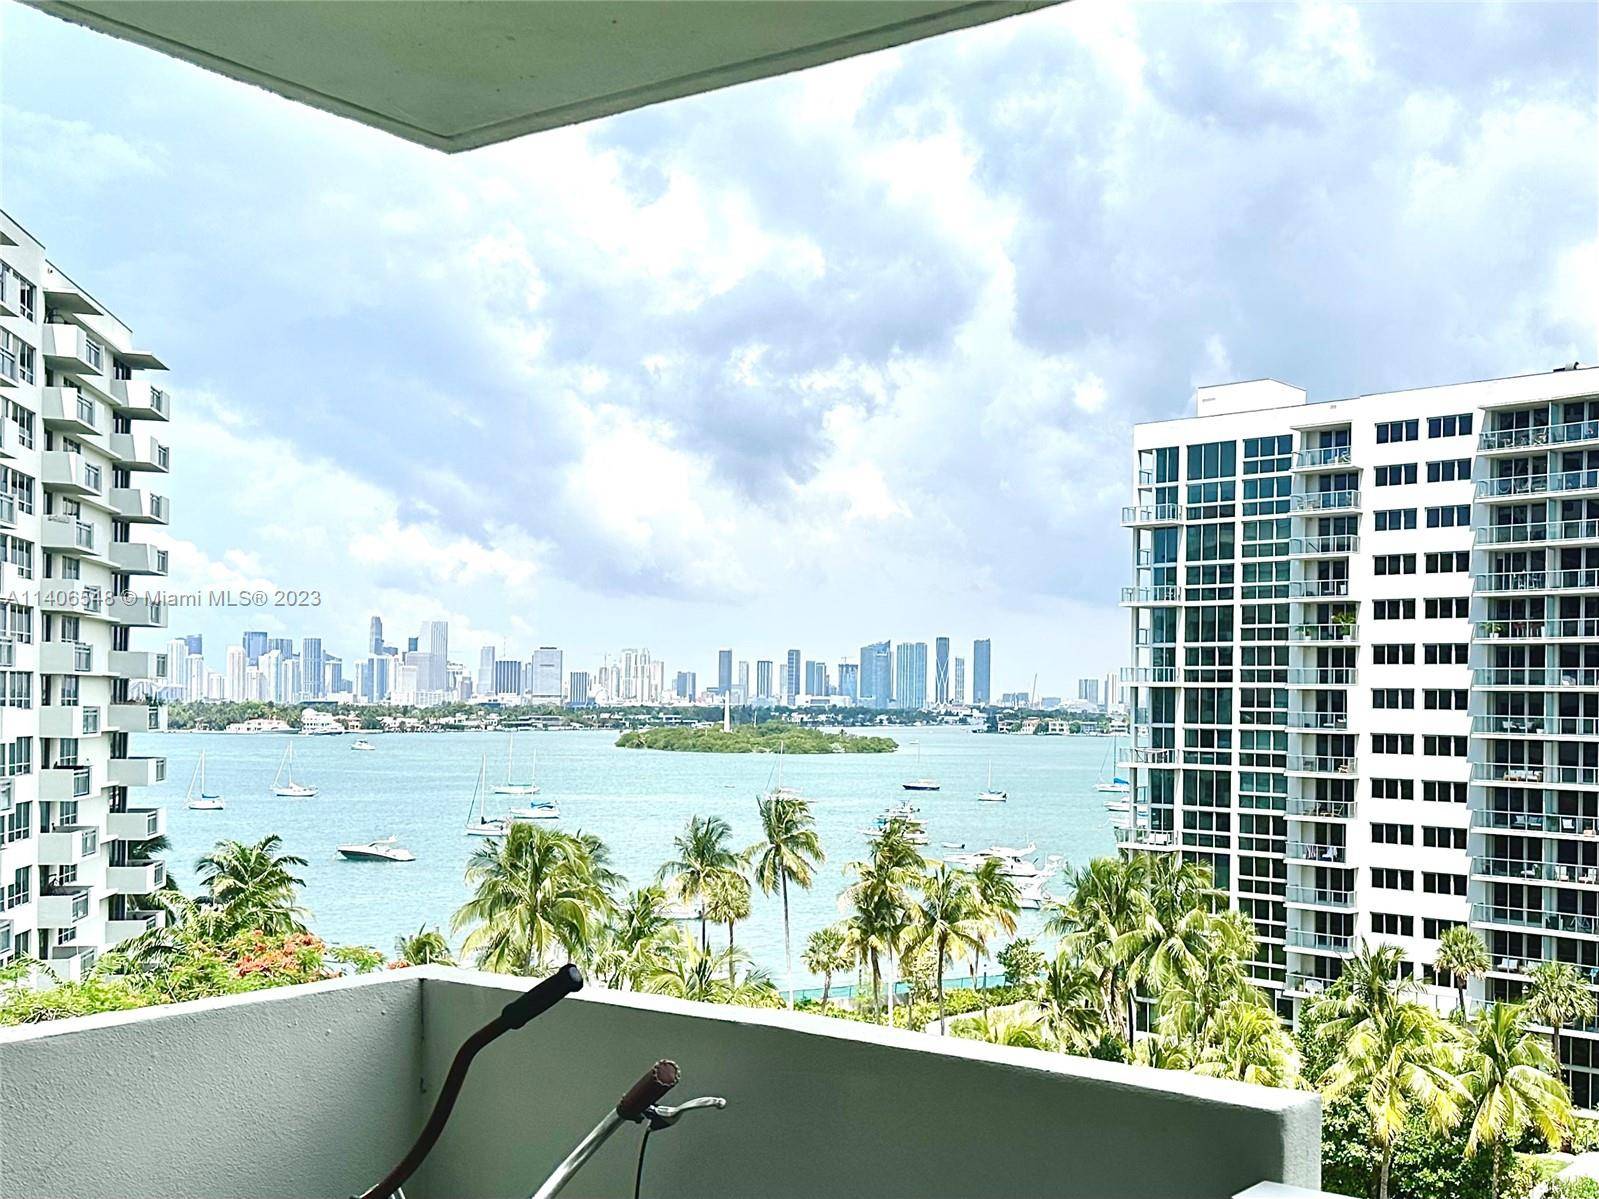 Beautiful furnished condo 2b 2b, private balcony with bay view, walking distance to Lincoln Road and close to the beach, amenities includes 2 pools, spa, jacuzzi, fitness center and more.